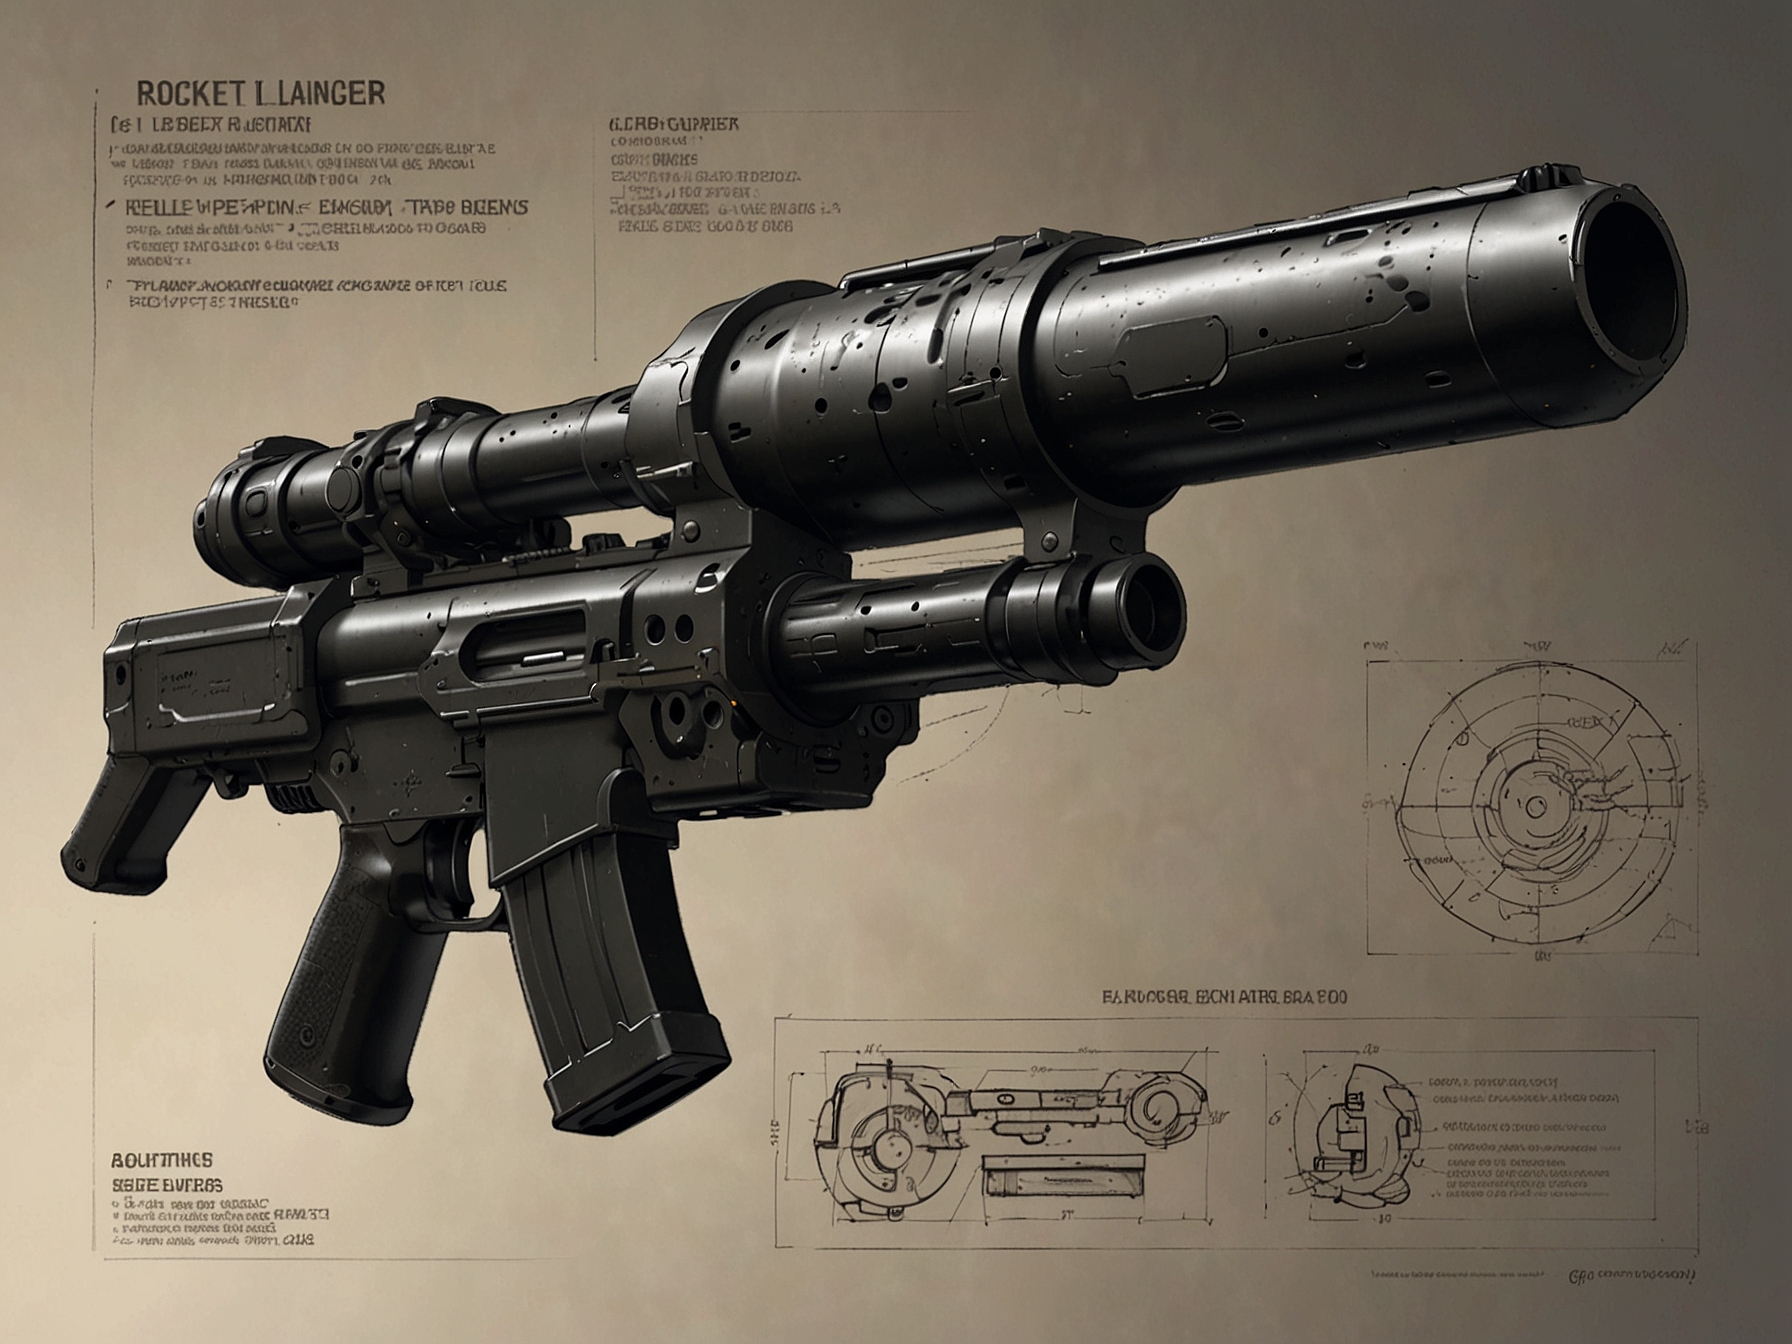 Concept art of the advanced rocket launcher mistakenly revealed by Sony, illustrating its sleek design and potential for precise, powerful tactical strikes in Helldivers 2.